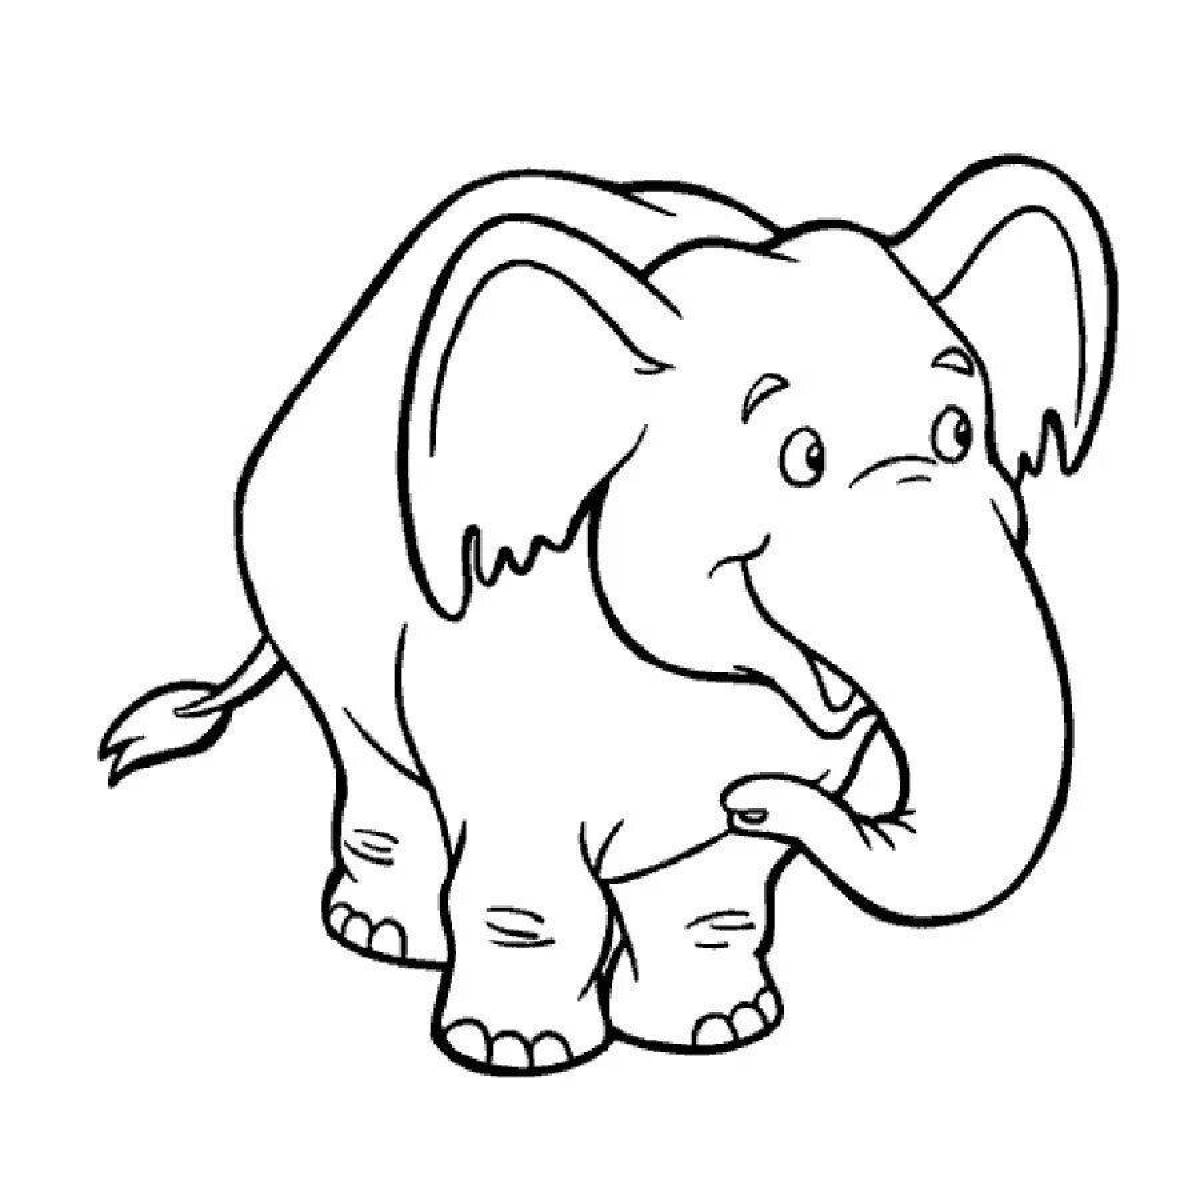 Fun elephant coloring for kids